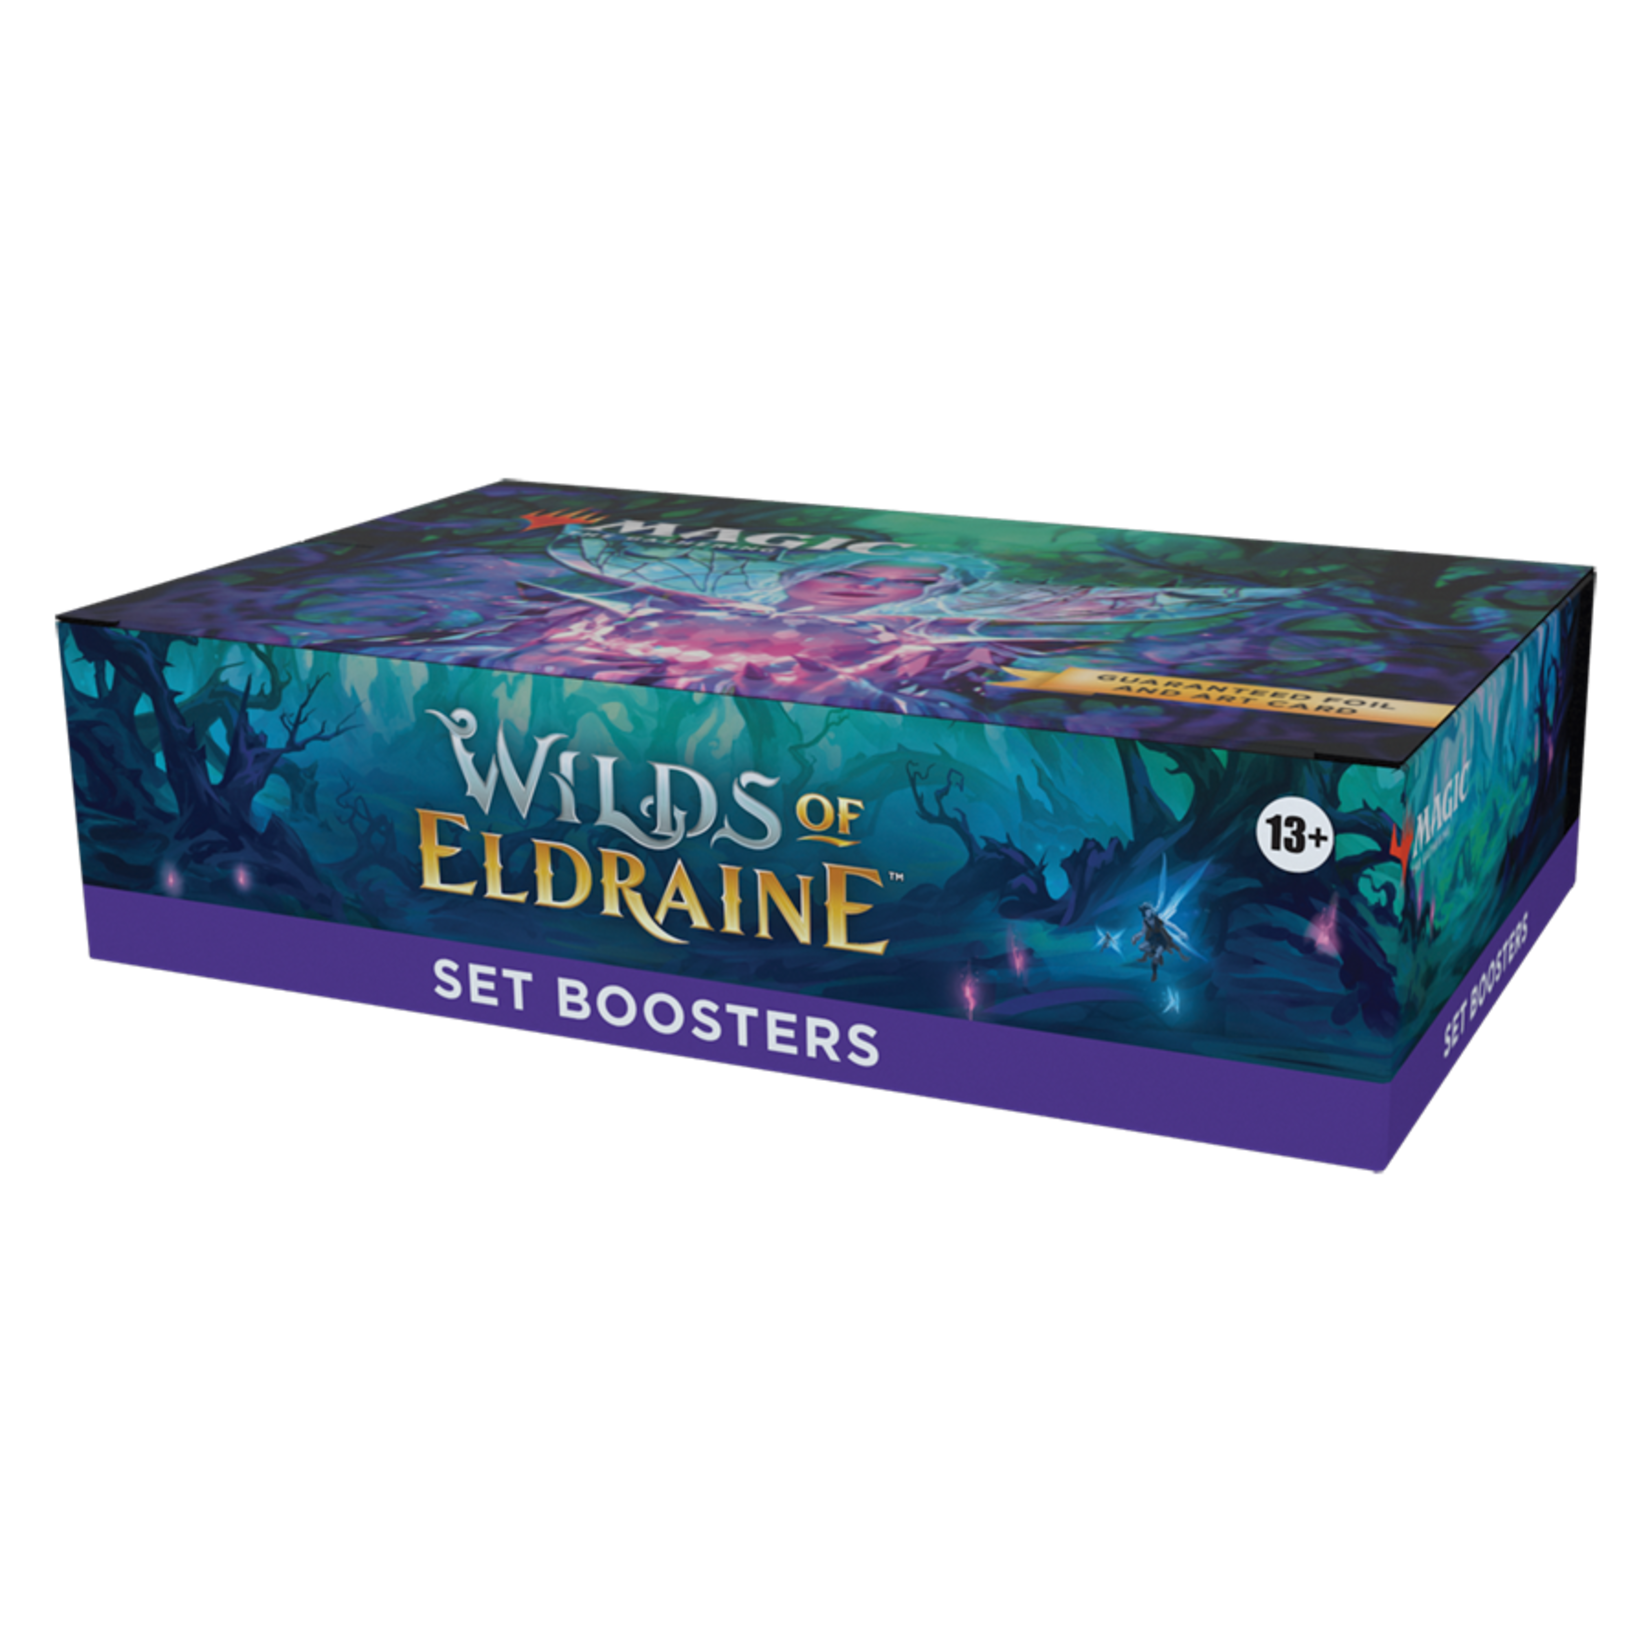 Magic: The Gathering Magic: The Gathering – Wilds of Eldraine Set Booster Box